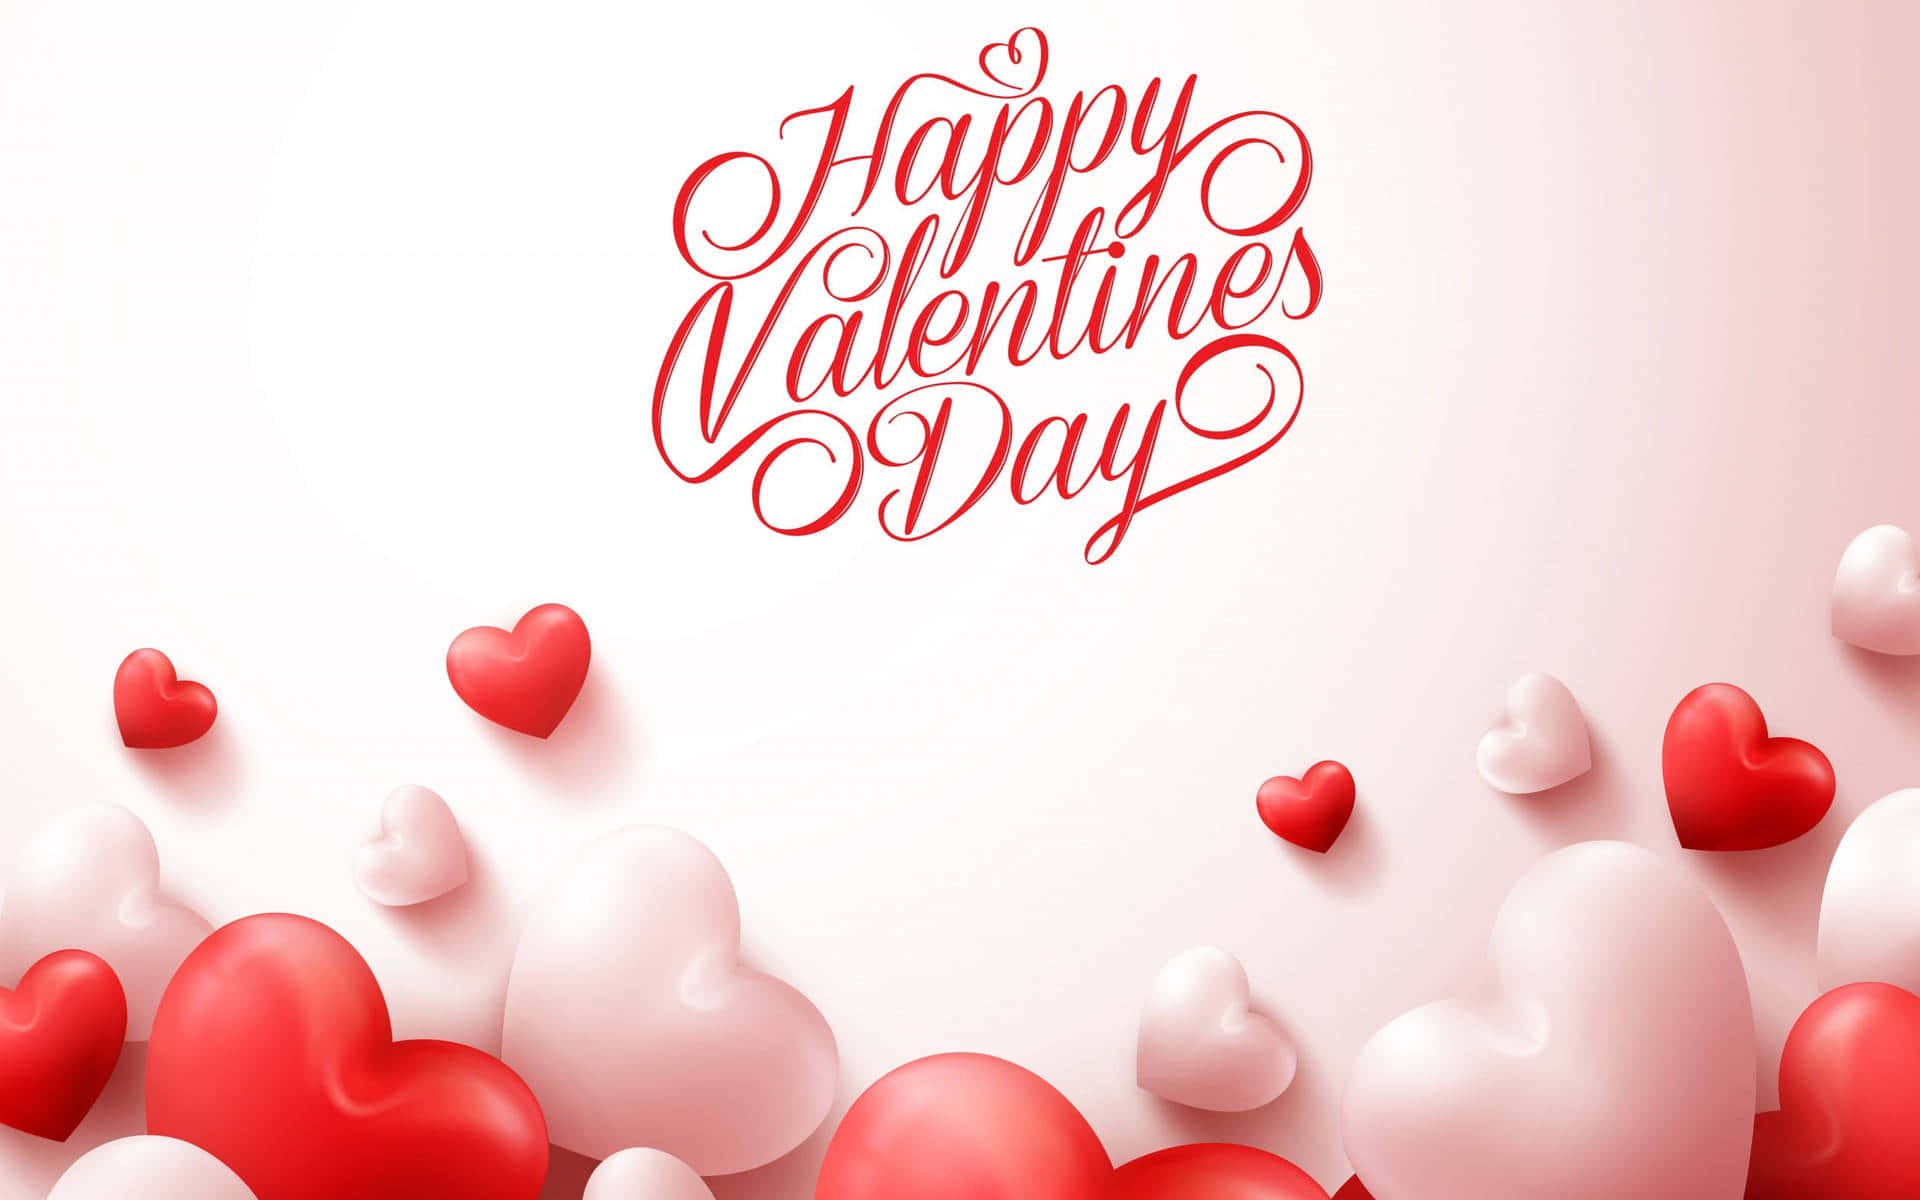 A romantic high-resolution Valentines Day background perfect for any special occasion.